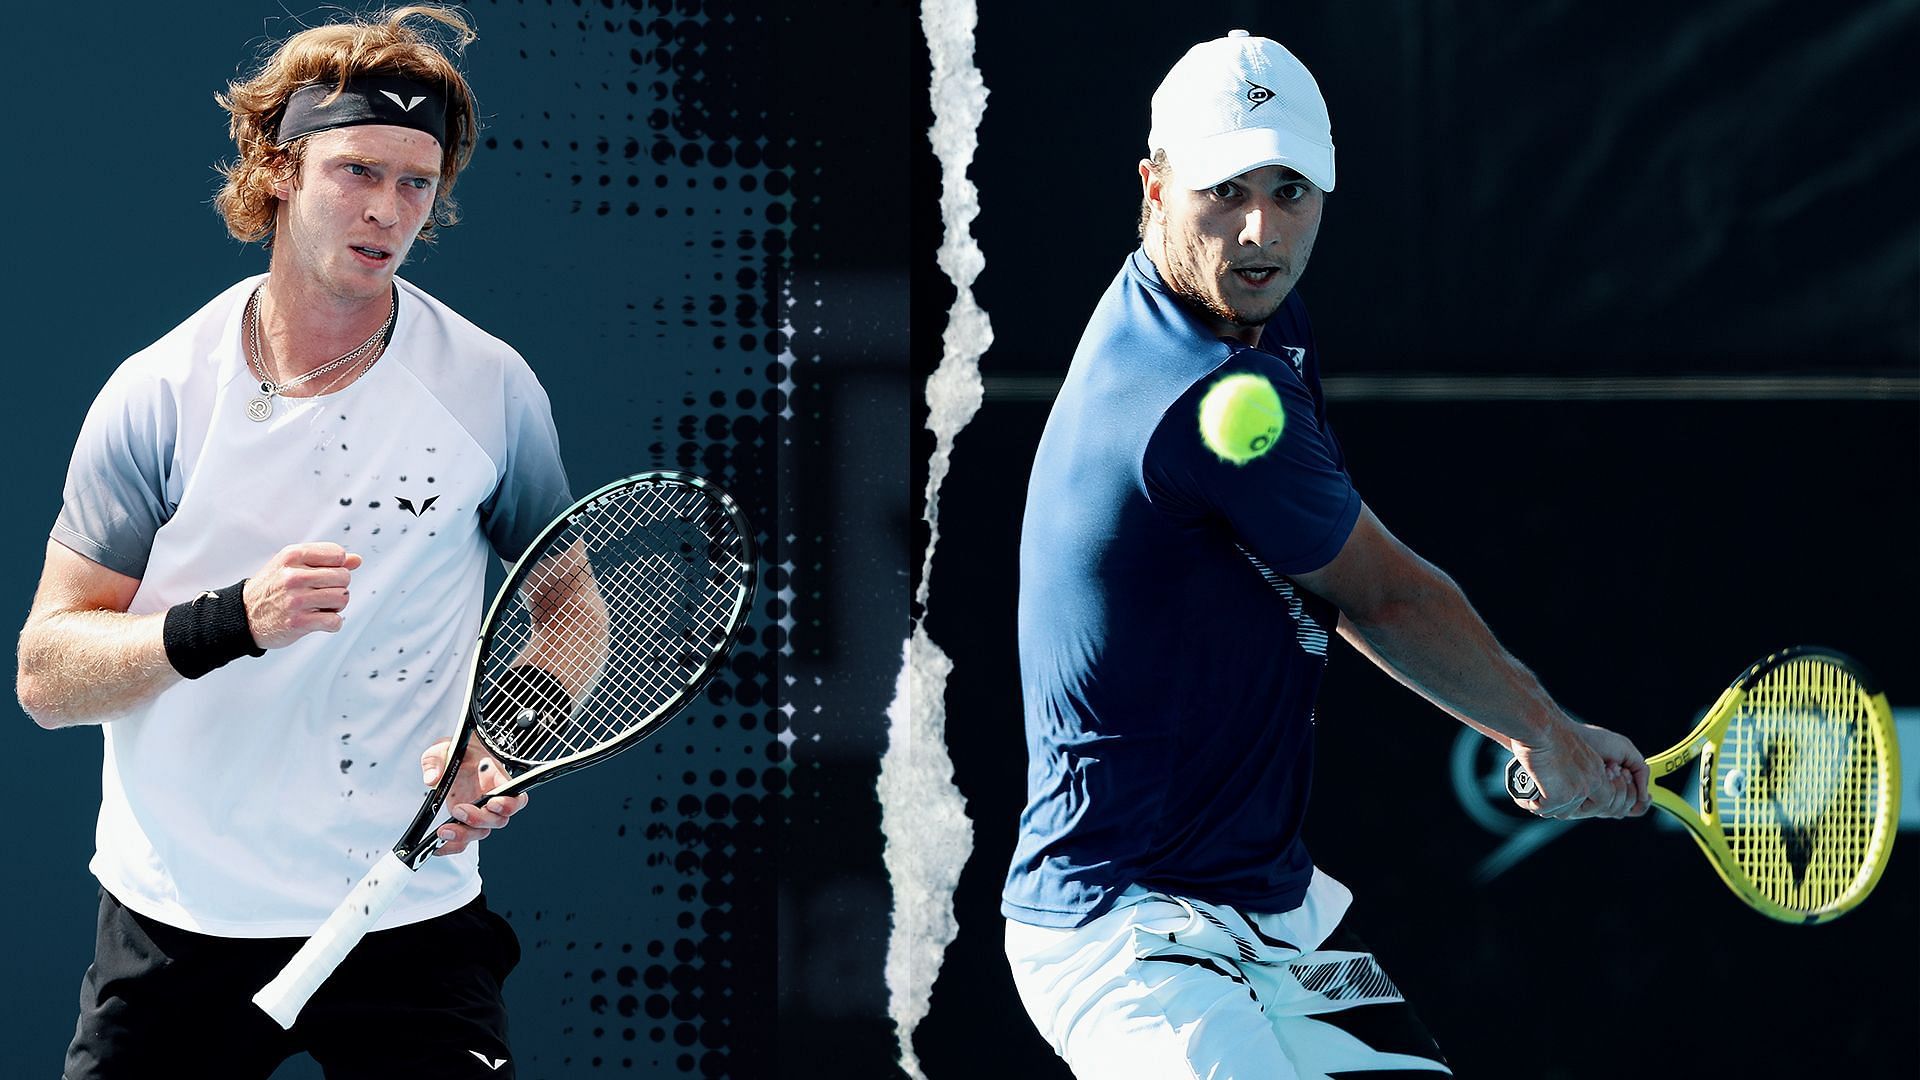 Rublev (left) takes on Kecmanovic in Miami on Sunday.